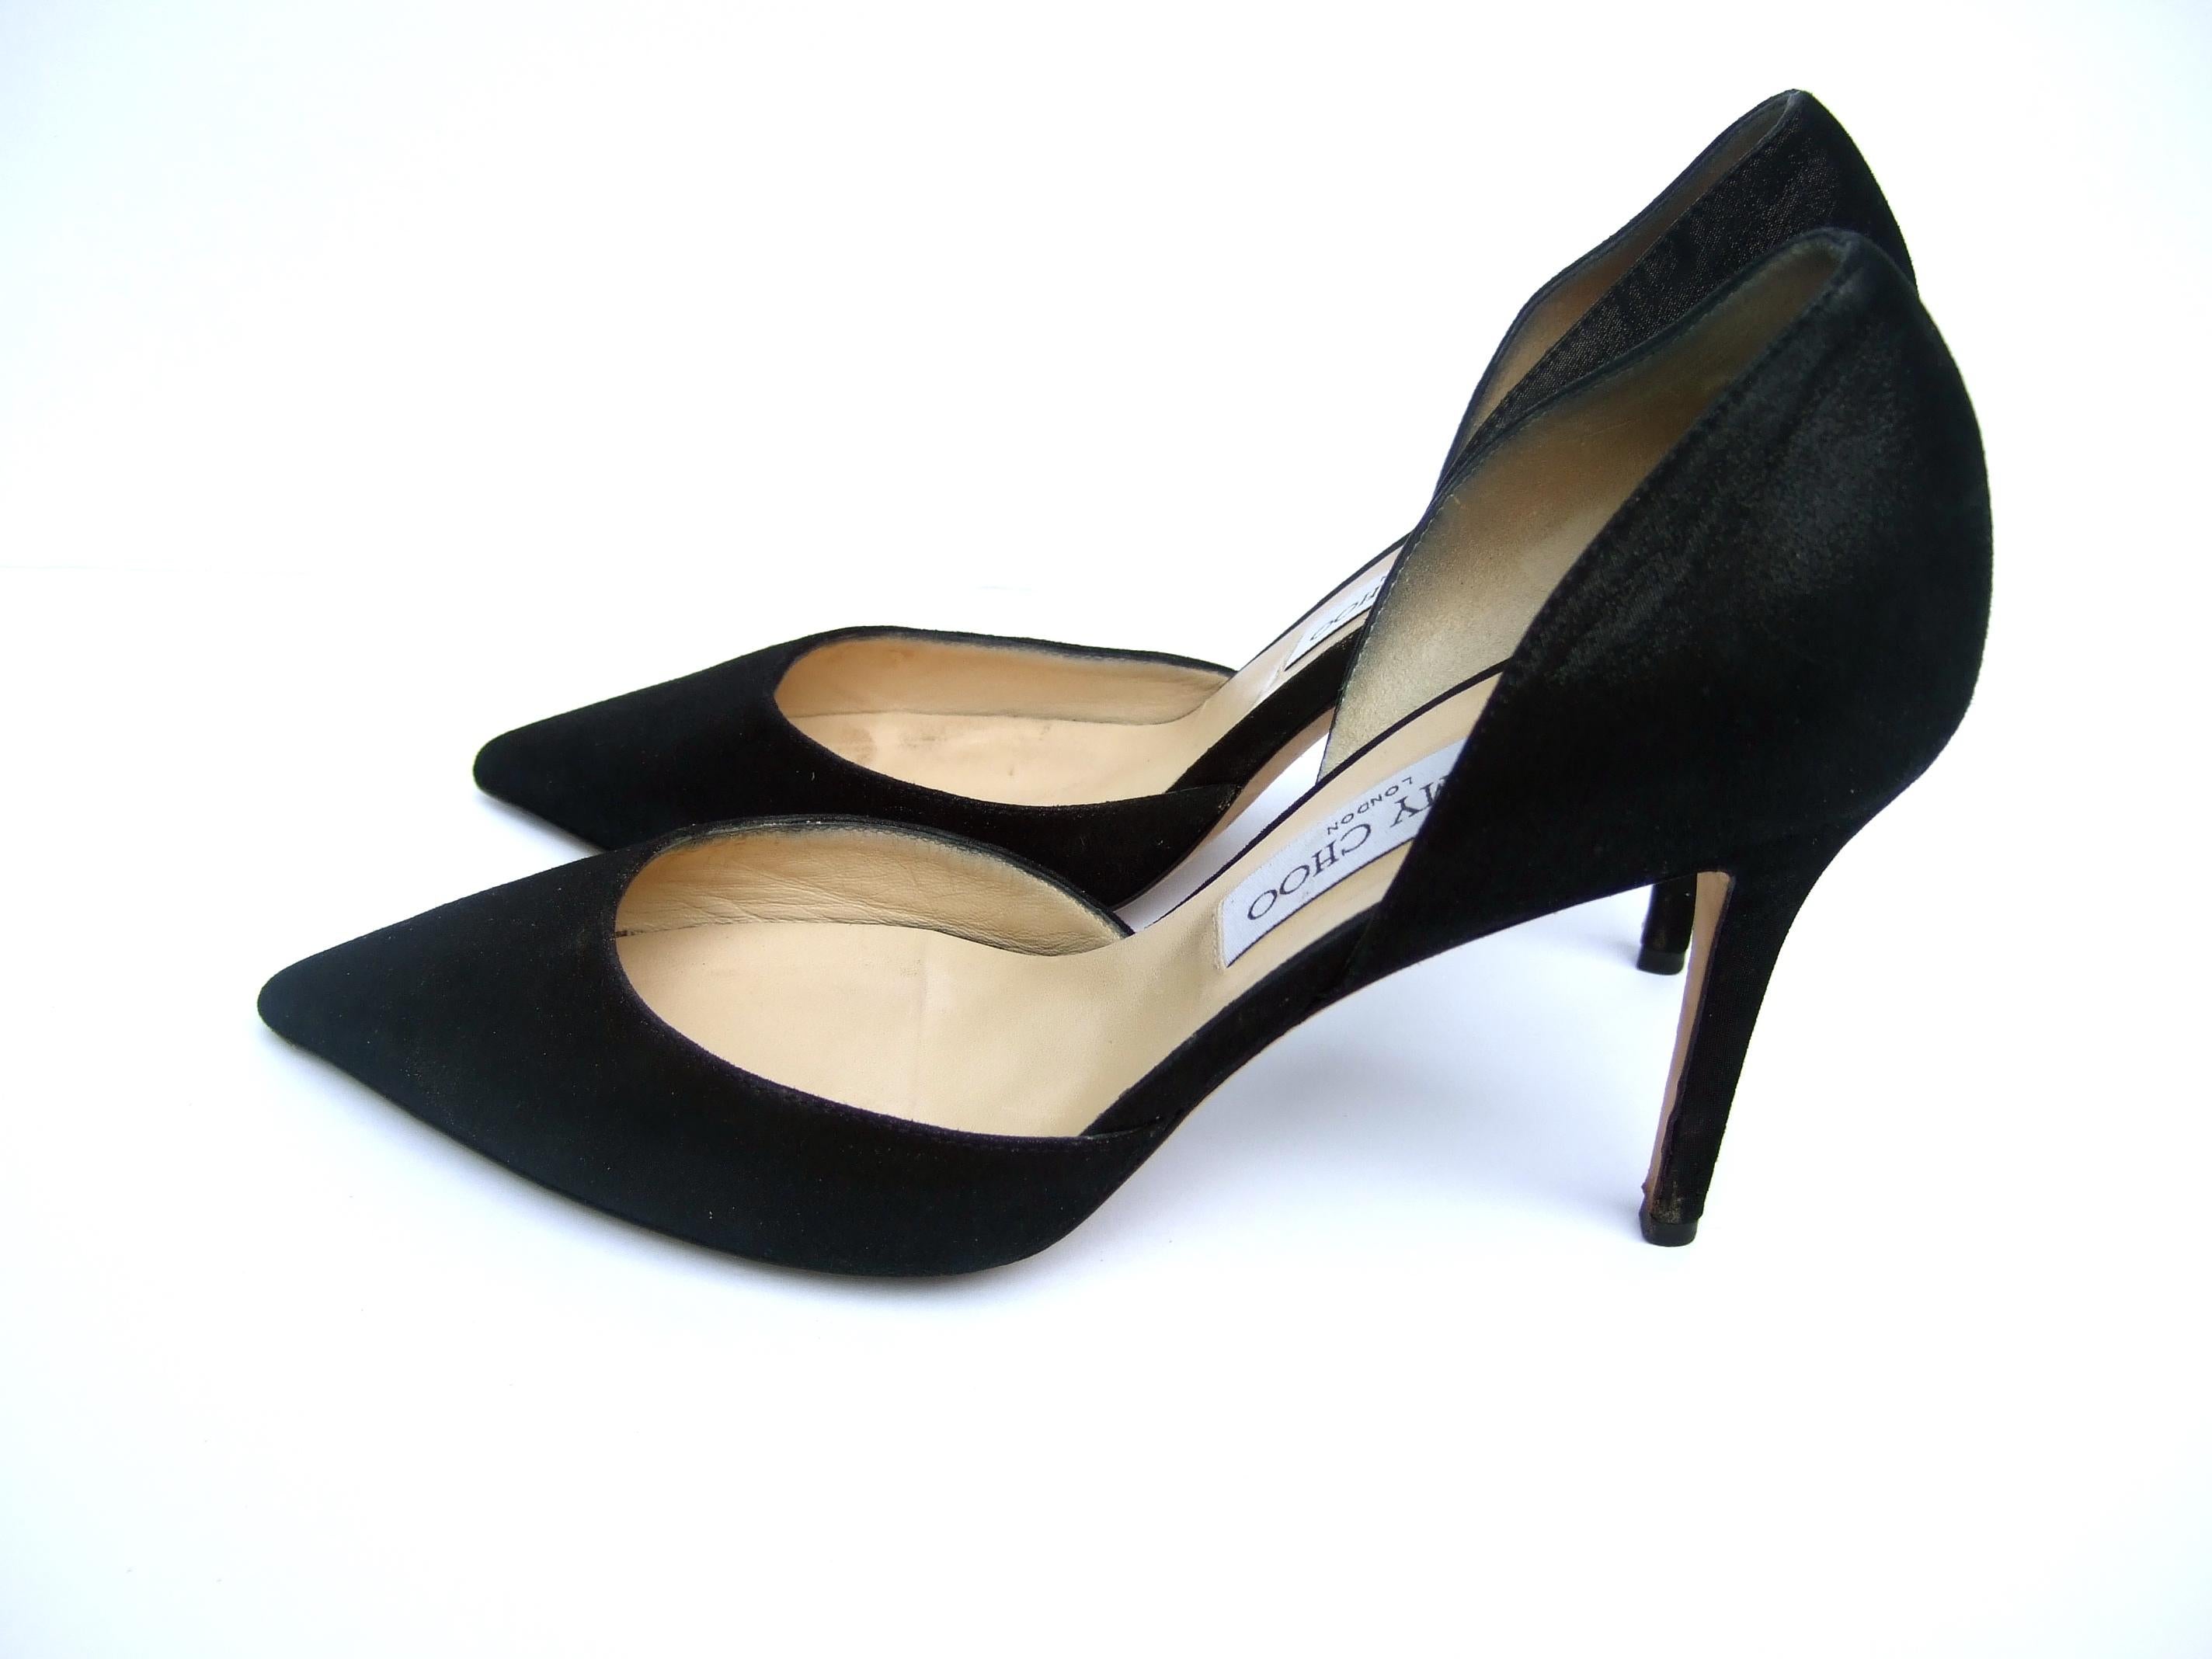 Jimmy Choo London Italian Black Brushed Leather Stiletto Pumps Size 40 c 1990s In Good Condition For Sale In University City, MO